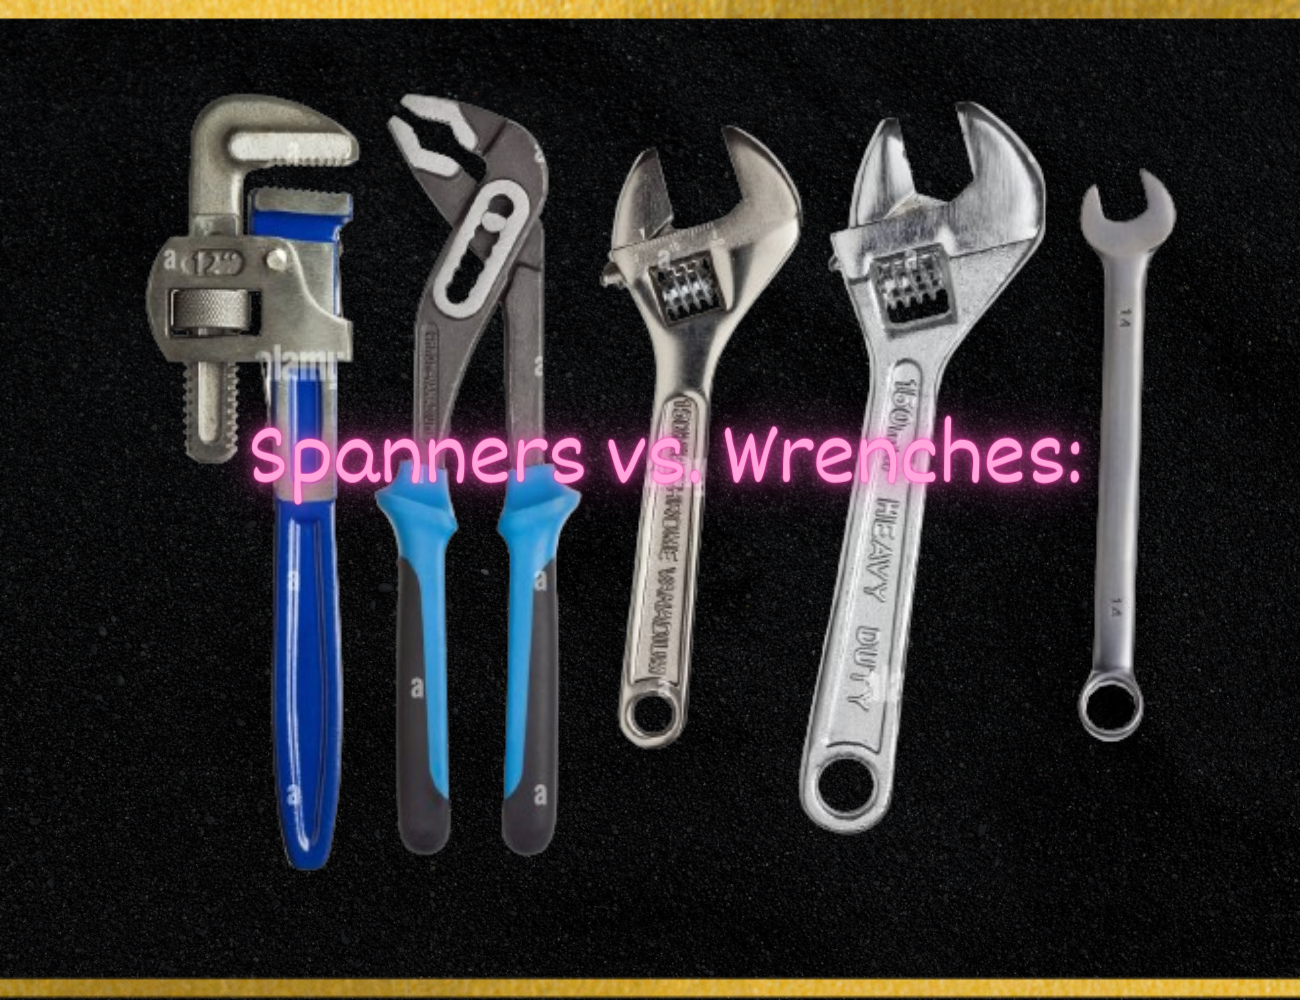 Spanners vs. Wrenches: Understanding the Key Differences